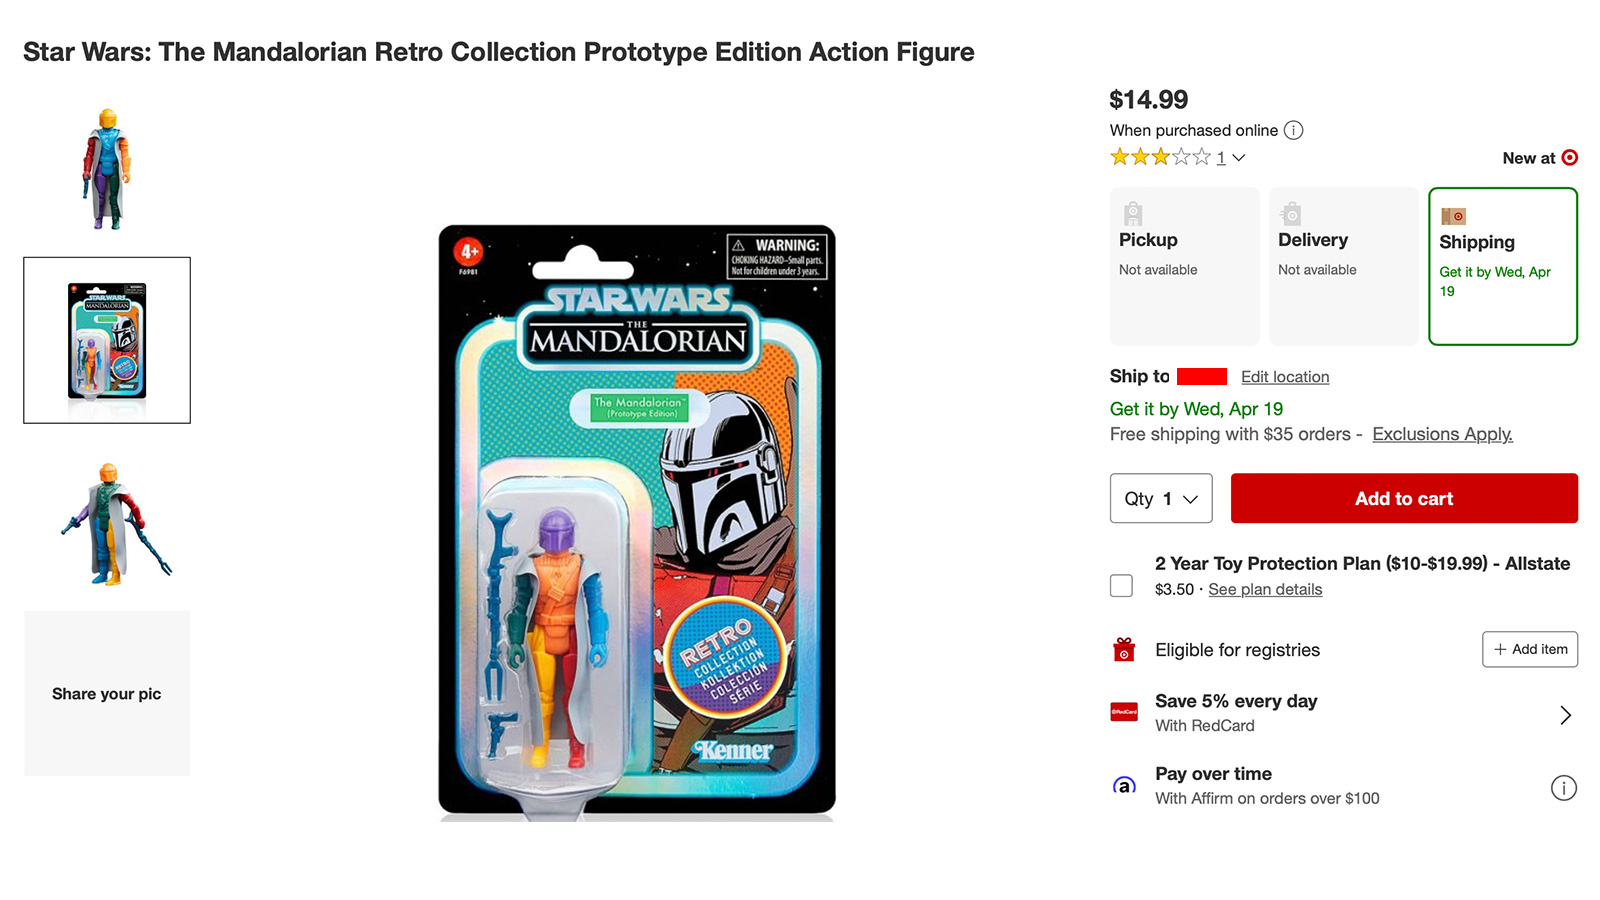 In Stock At Target.com - Exclusive Retro Collection The Mandalorian Prototype Edition Figure